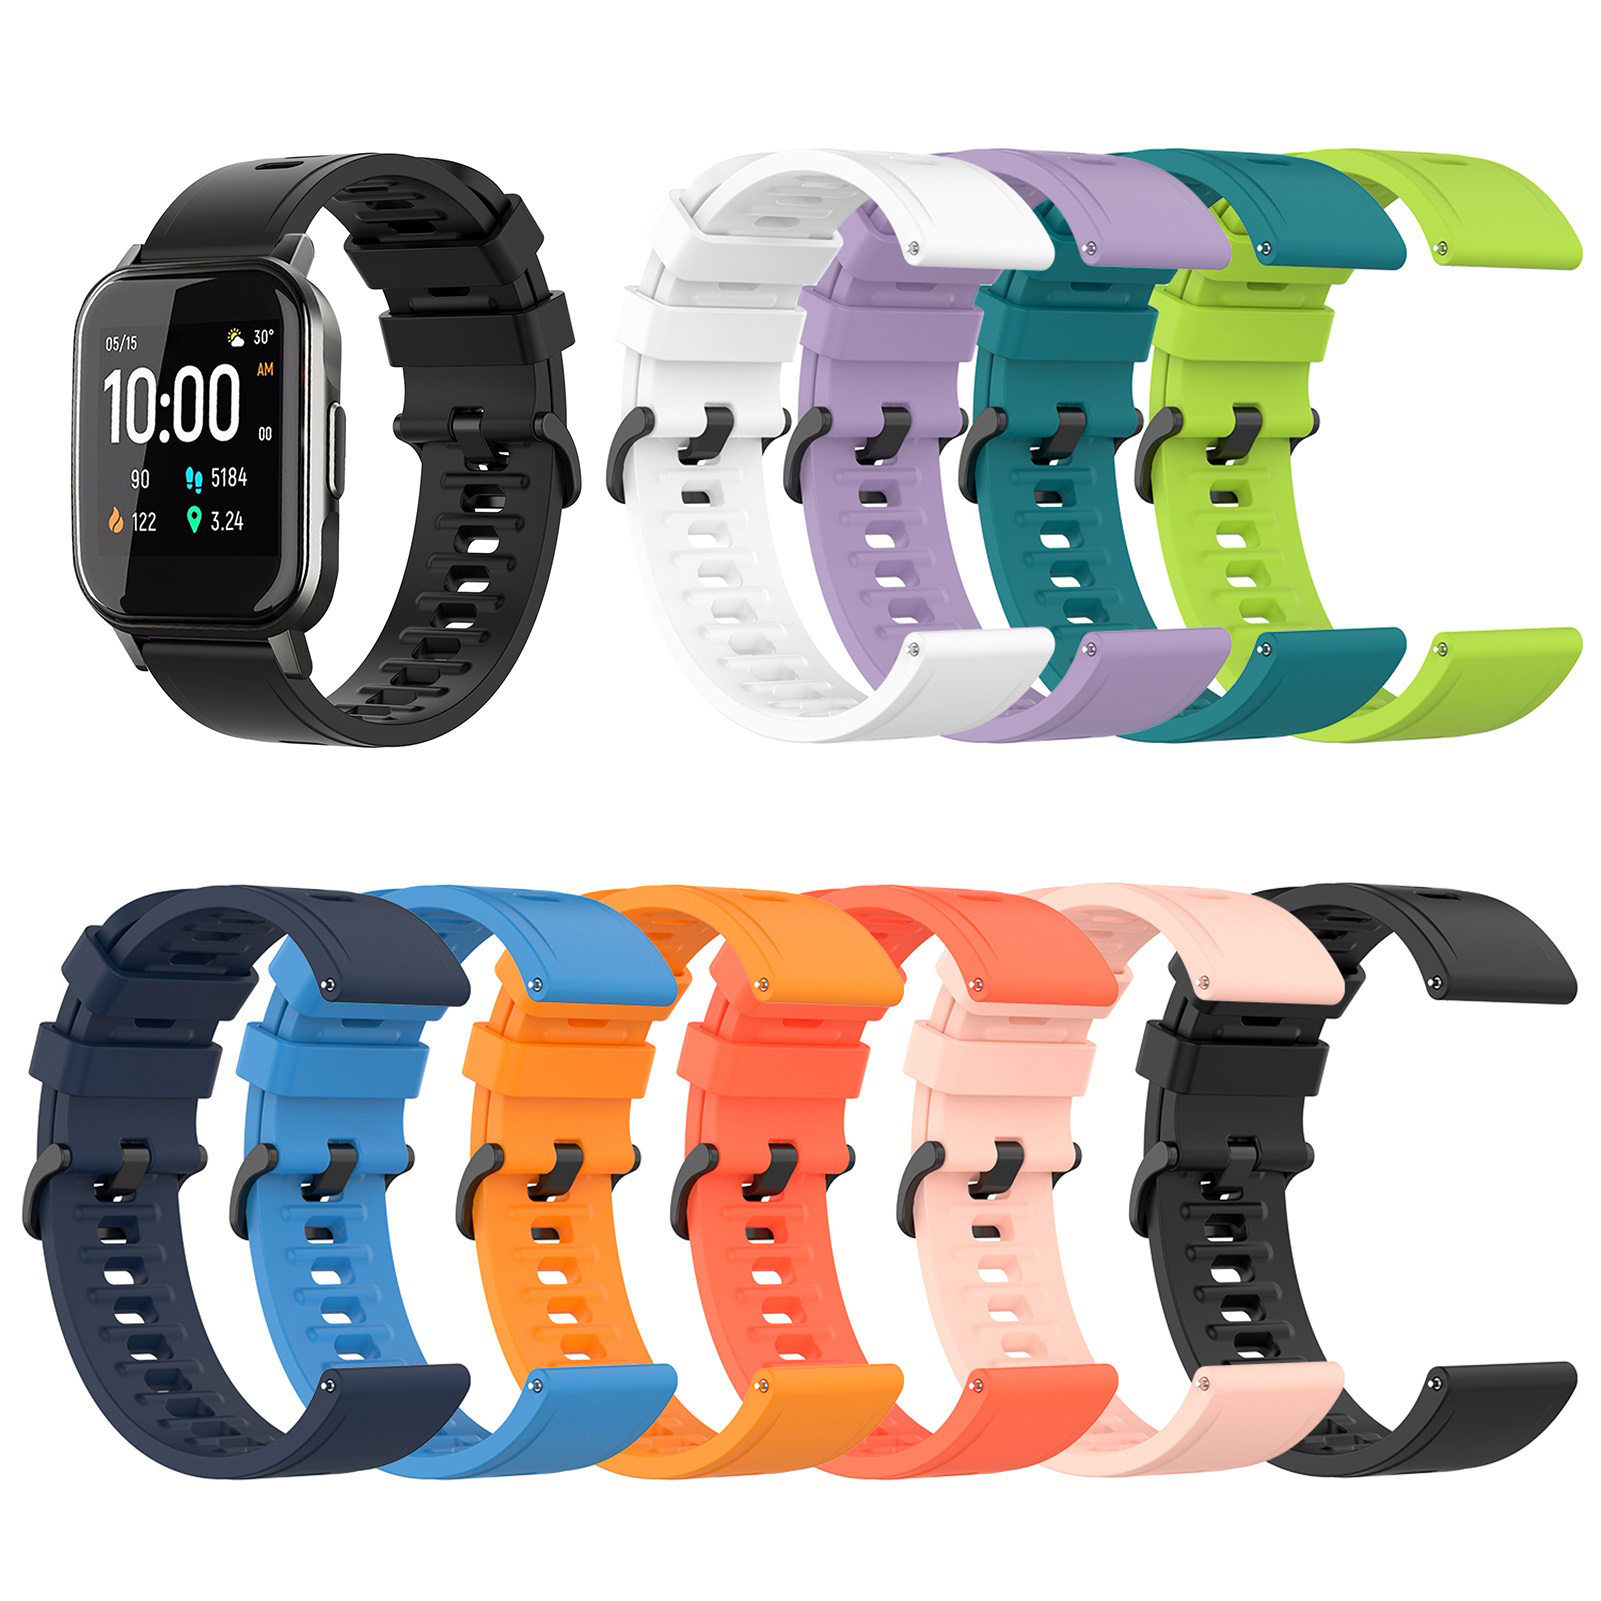 Bakeey-20mm-Multi-color-Silicone-Smart-Watch-Band-Replacement-Strap-For-Zeblaze-GTR--Haylou-LS02-1785338-1